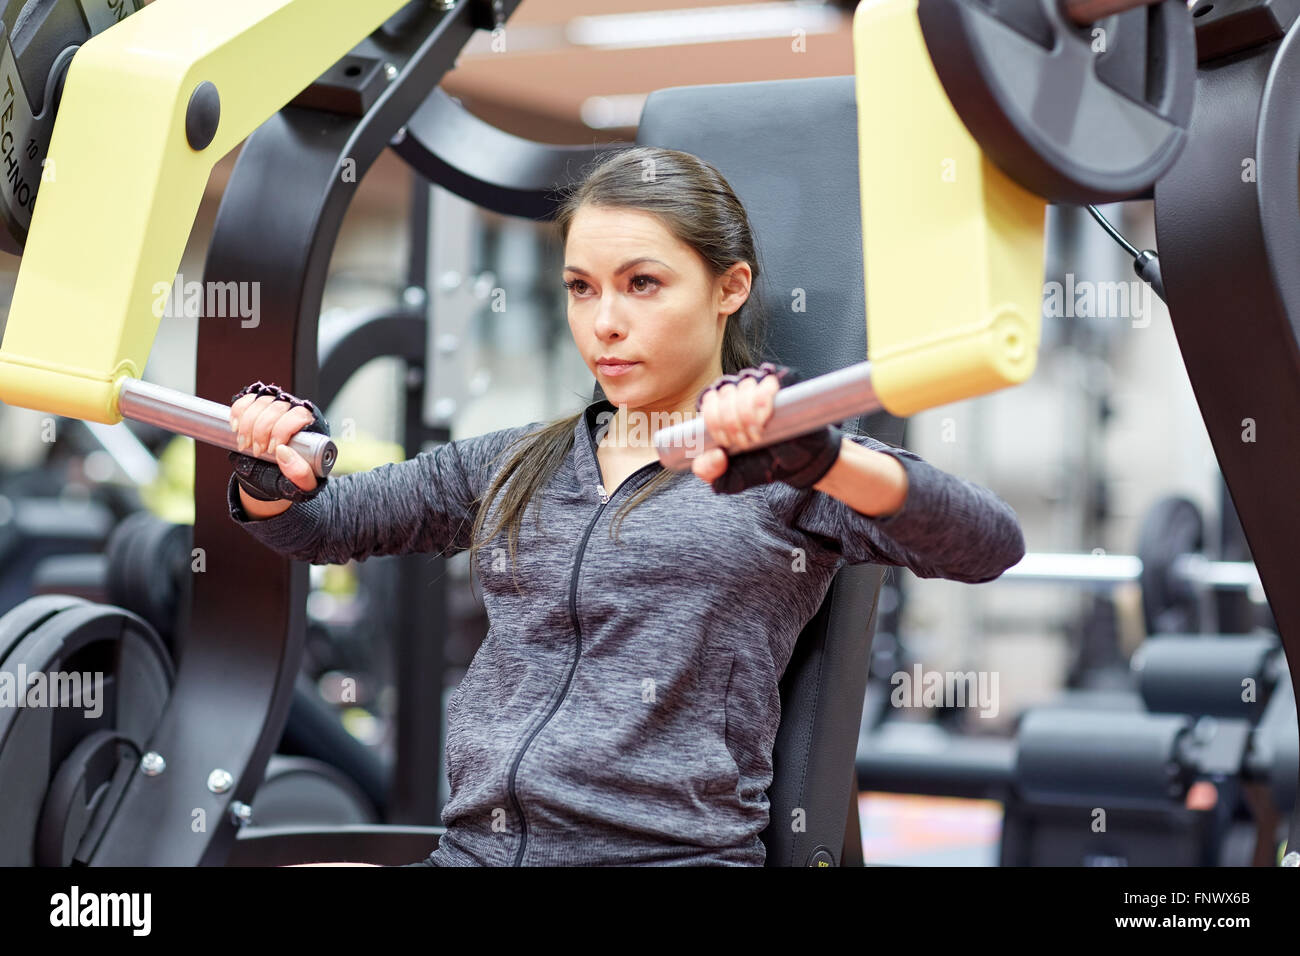 woman flexing muscles on chest press gym machine Stock Photo - Alamy